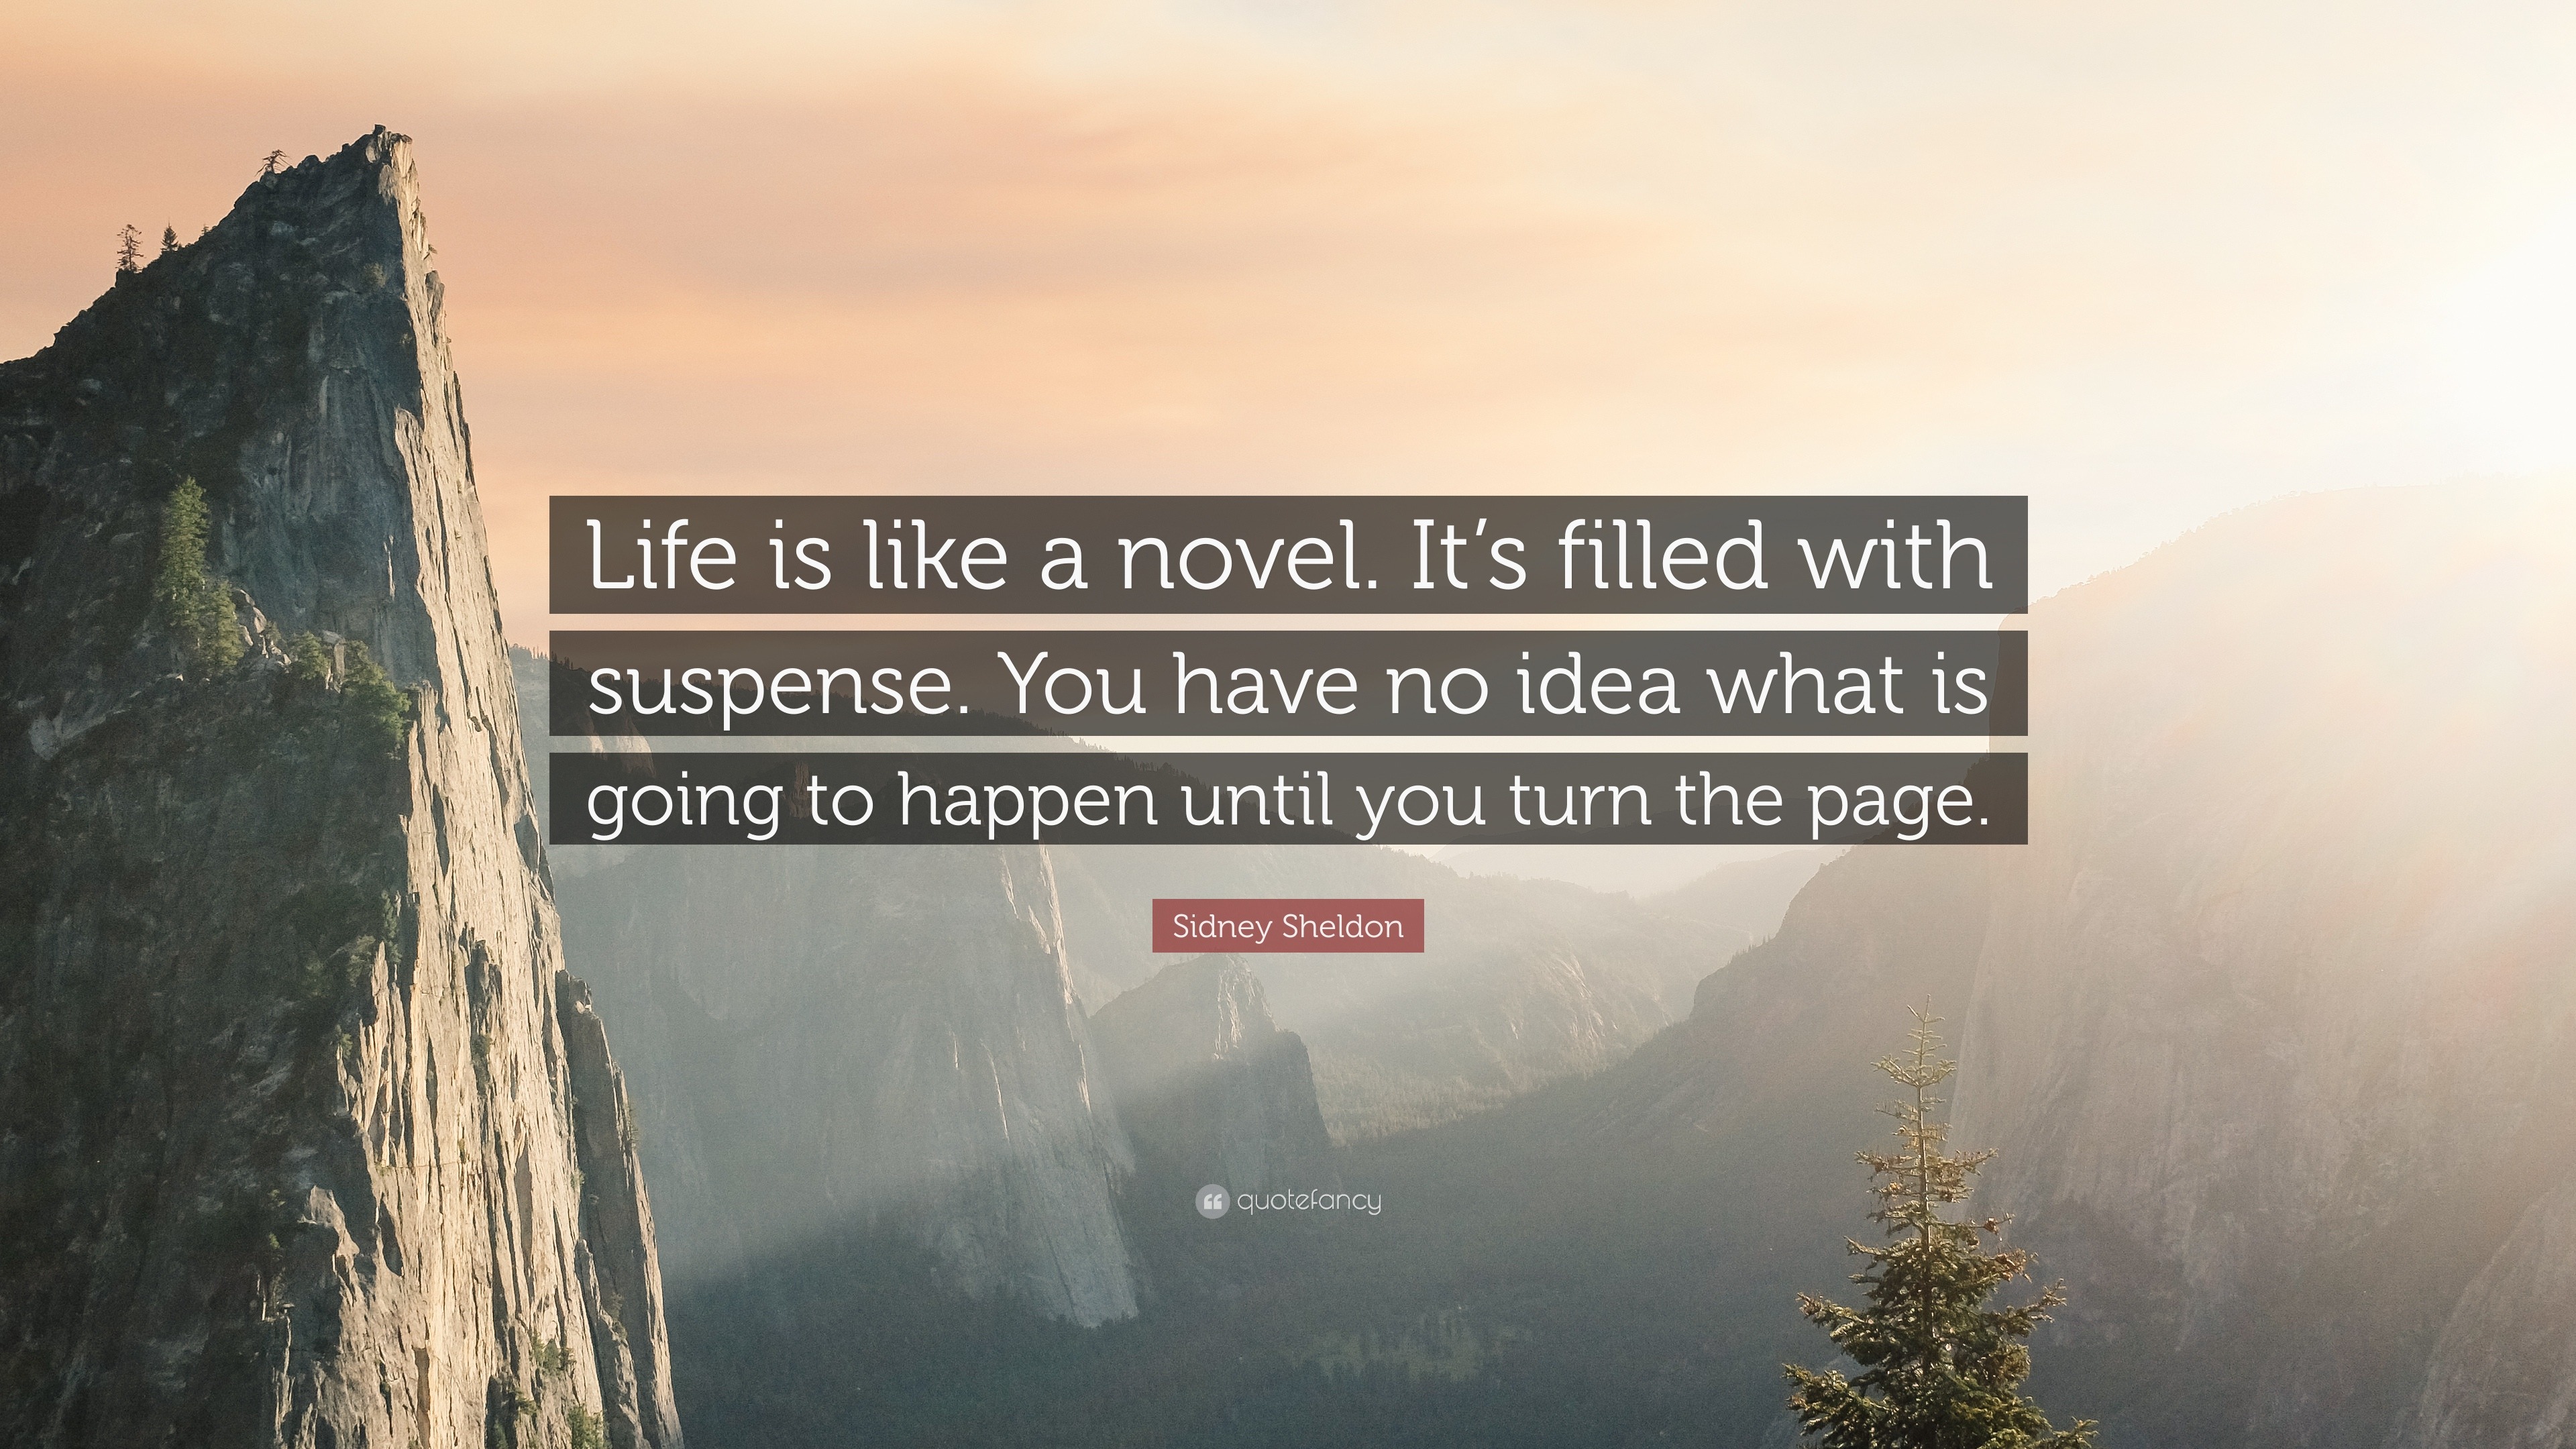 Sidney Sheldon Quote Life Is Like A Novel It S Filled With Suspense You Have No Idea What Is Going To Happen Until You Turn The Page 11 Wallpapers Quotefancy